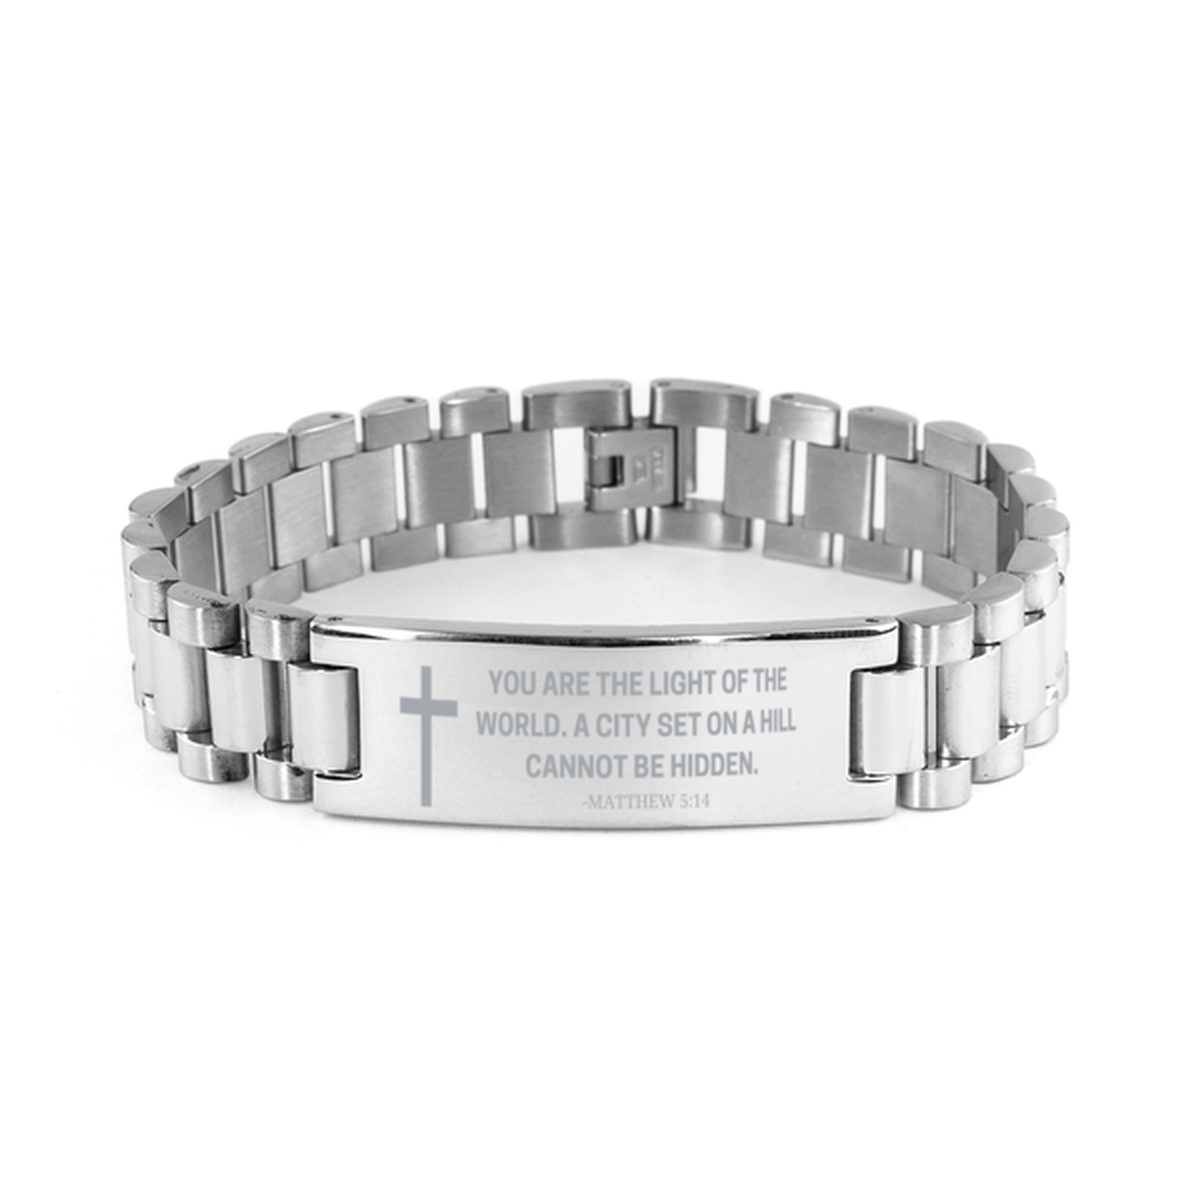 Baptism Gifts For Teenage Boys Girls, Christian Bible Verse Ladder Stainless Steel Bracelet, You are the light of the world, Catholic Confirmation Gifts for Son, Godson, Grandson, Nephew